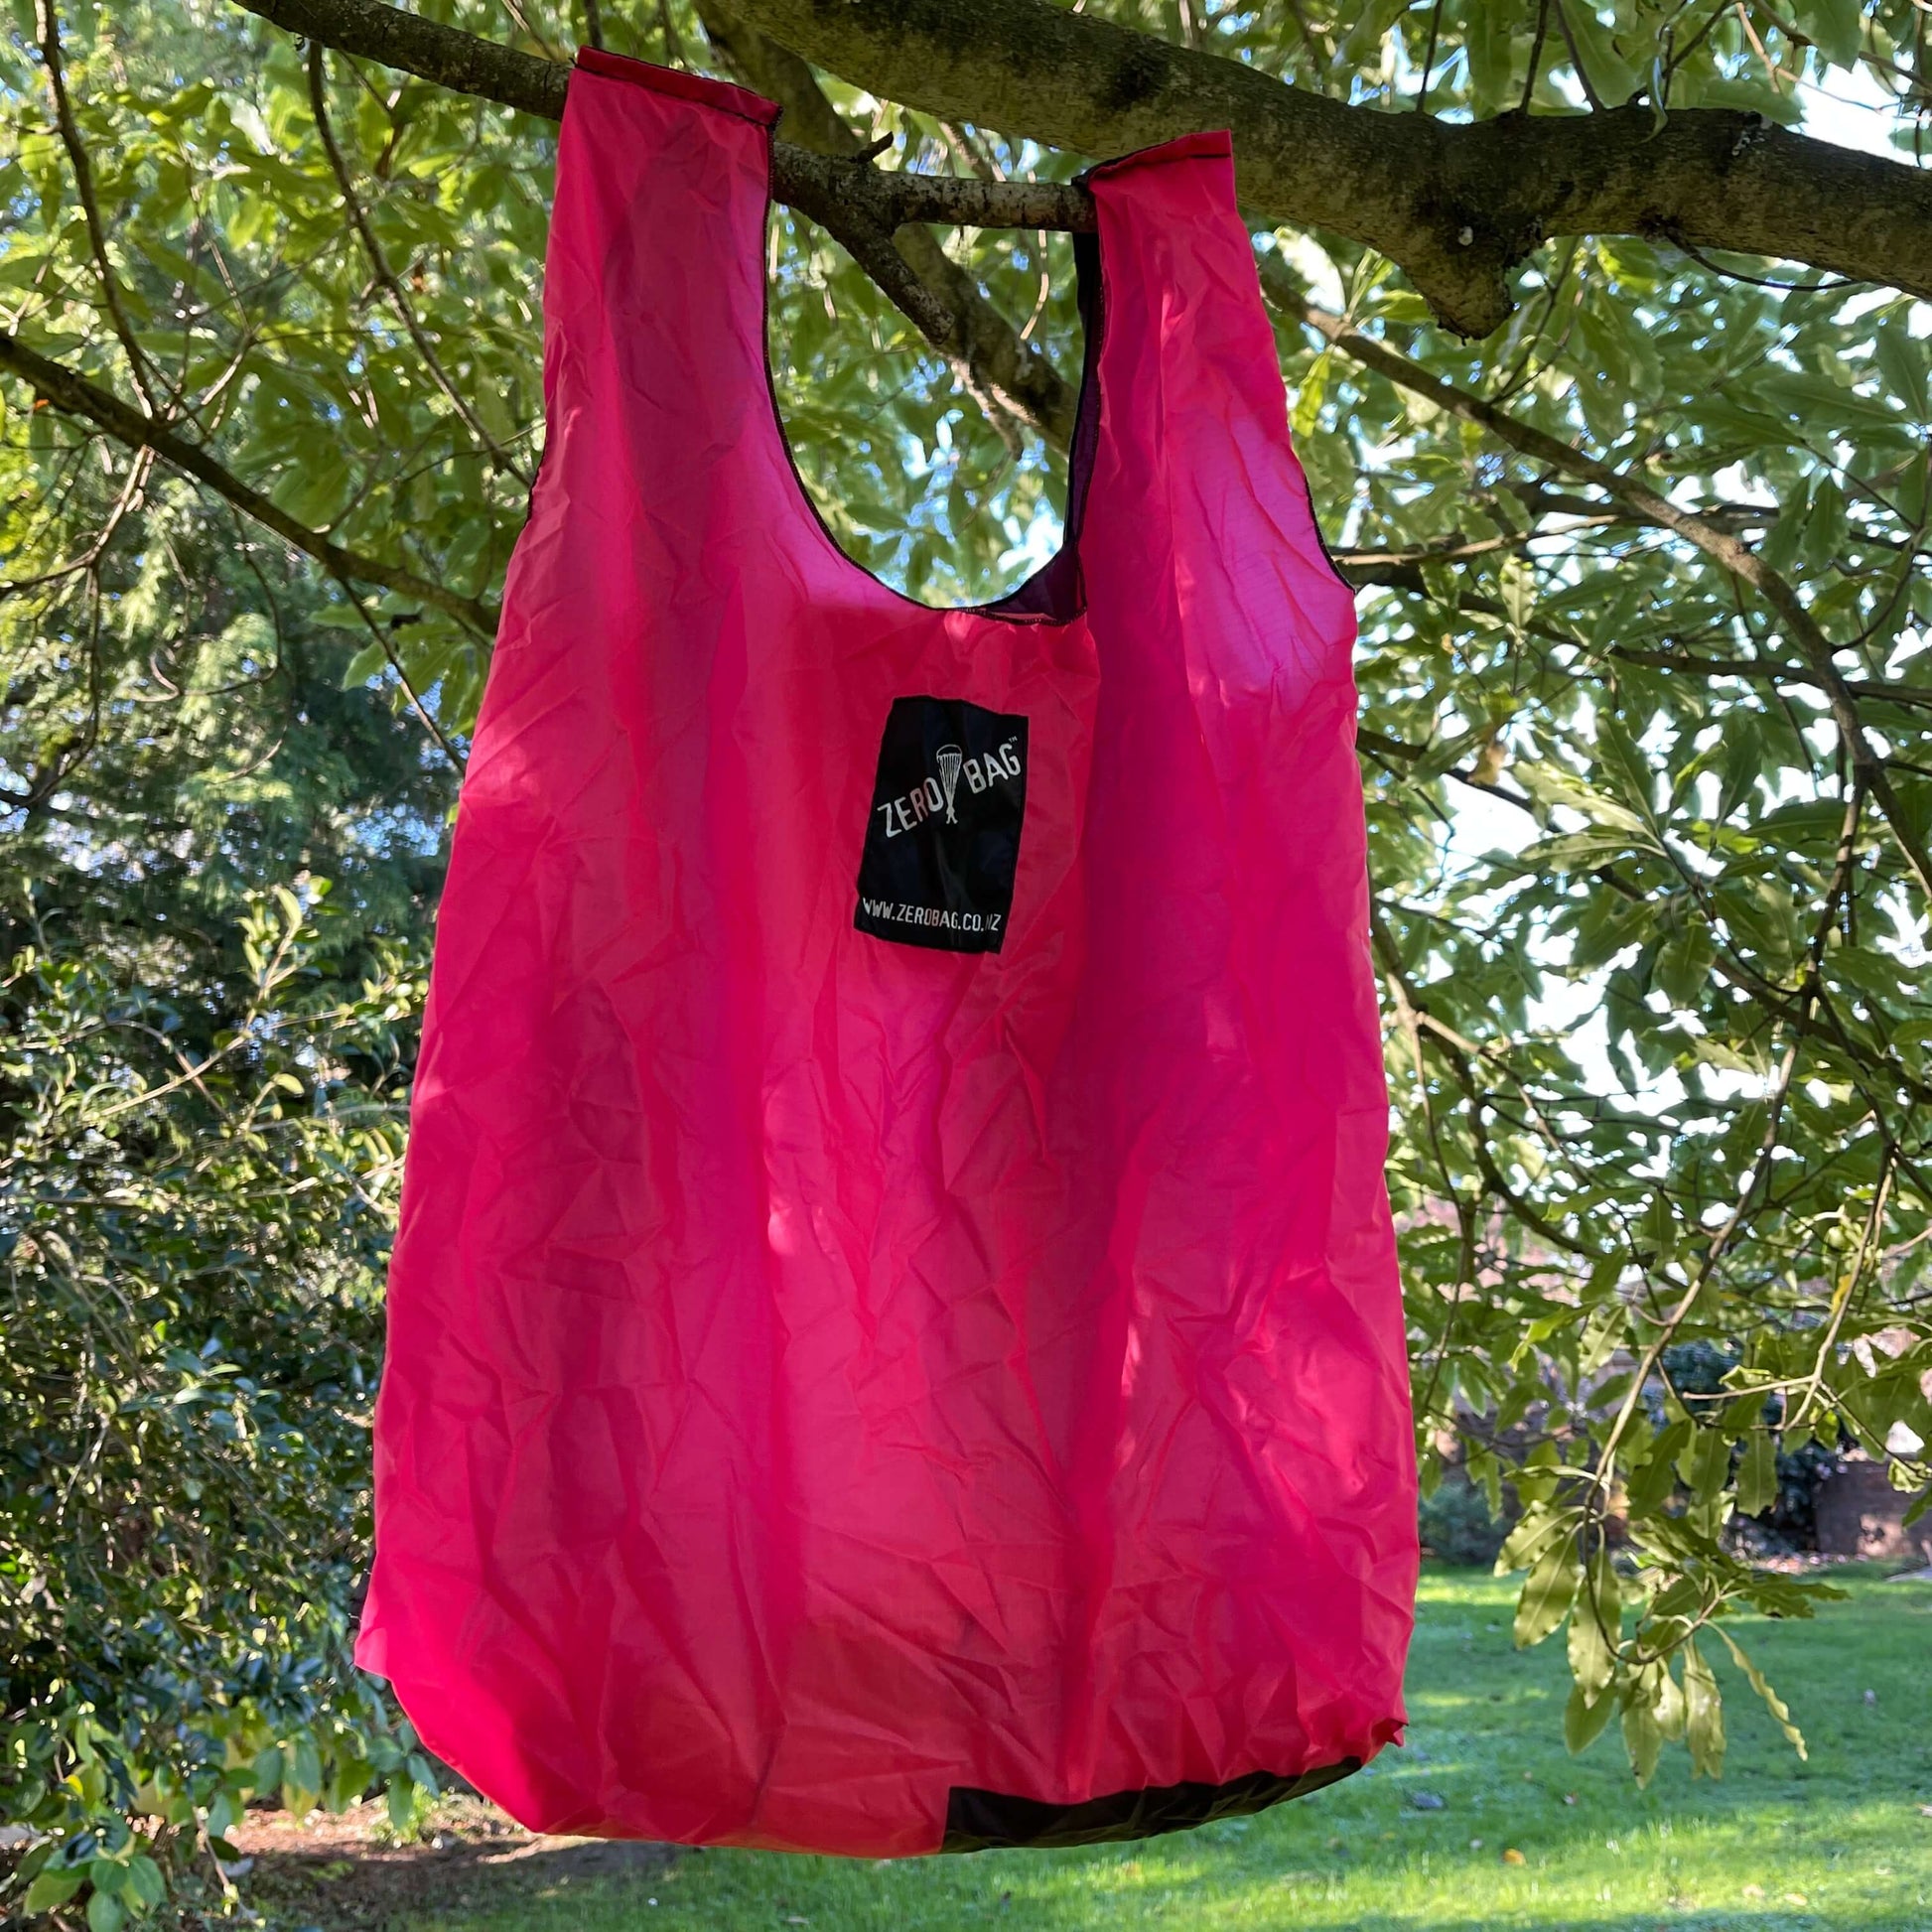 Bright pink tote bag made from parachutes.